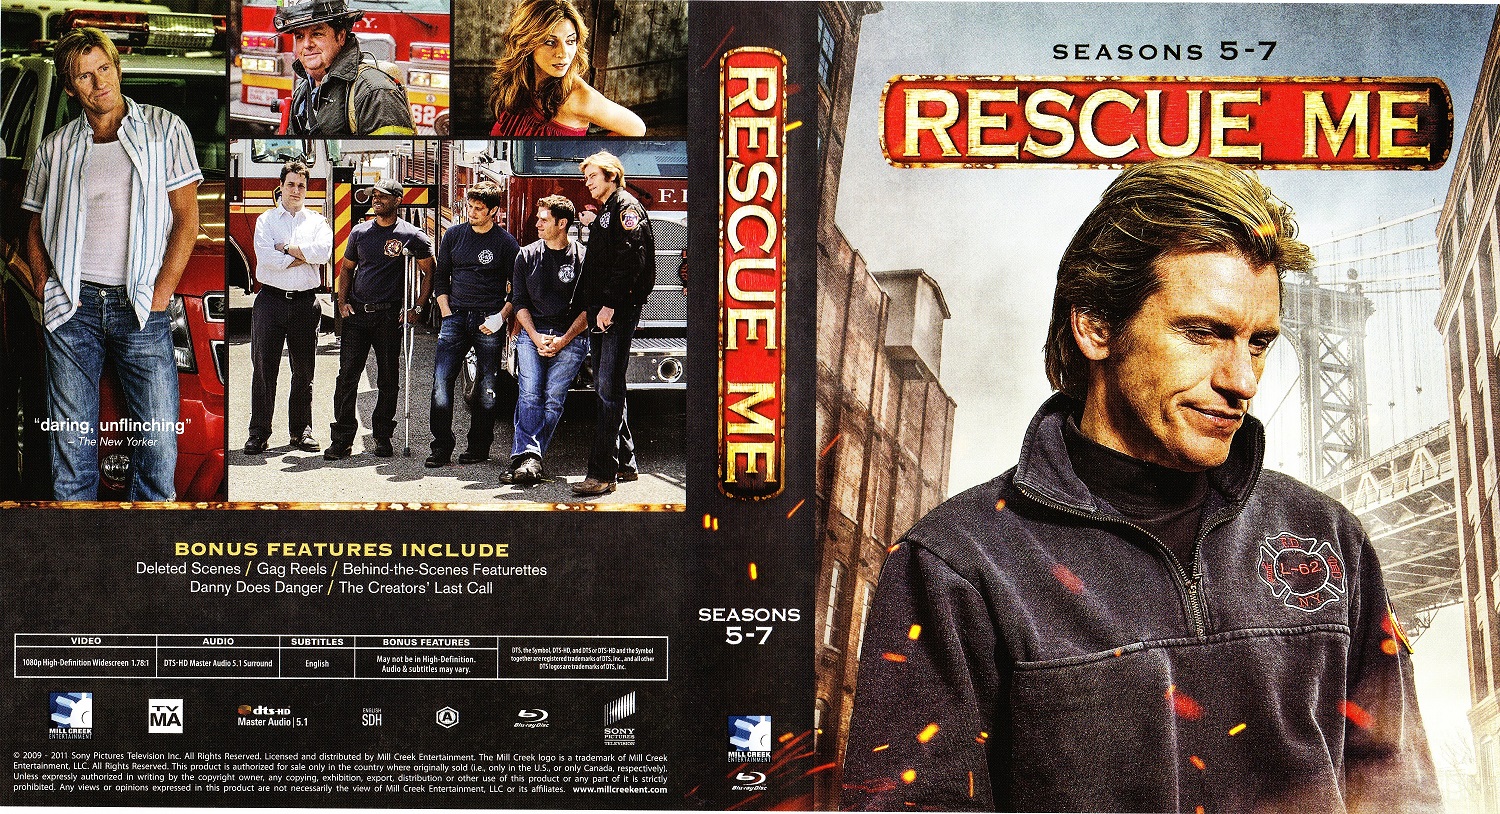 Blu-ray Review: RESCUE ME - The Complete Series 